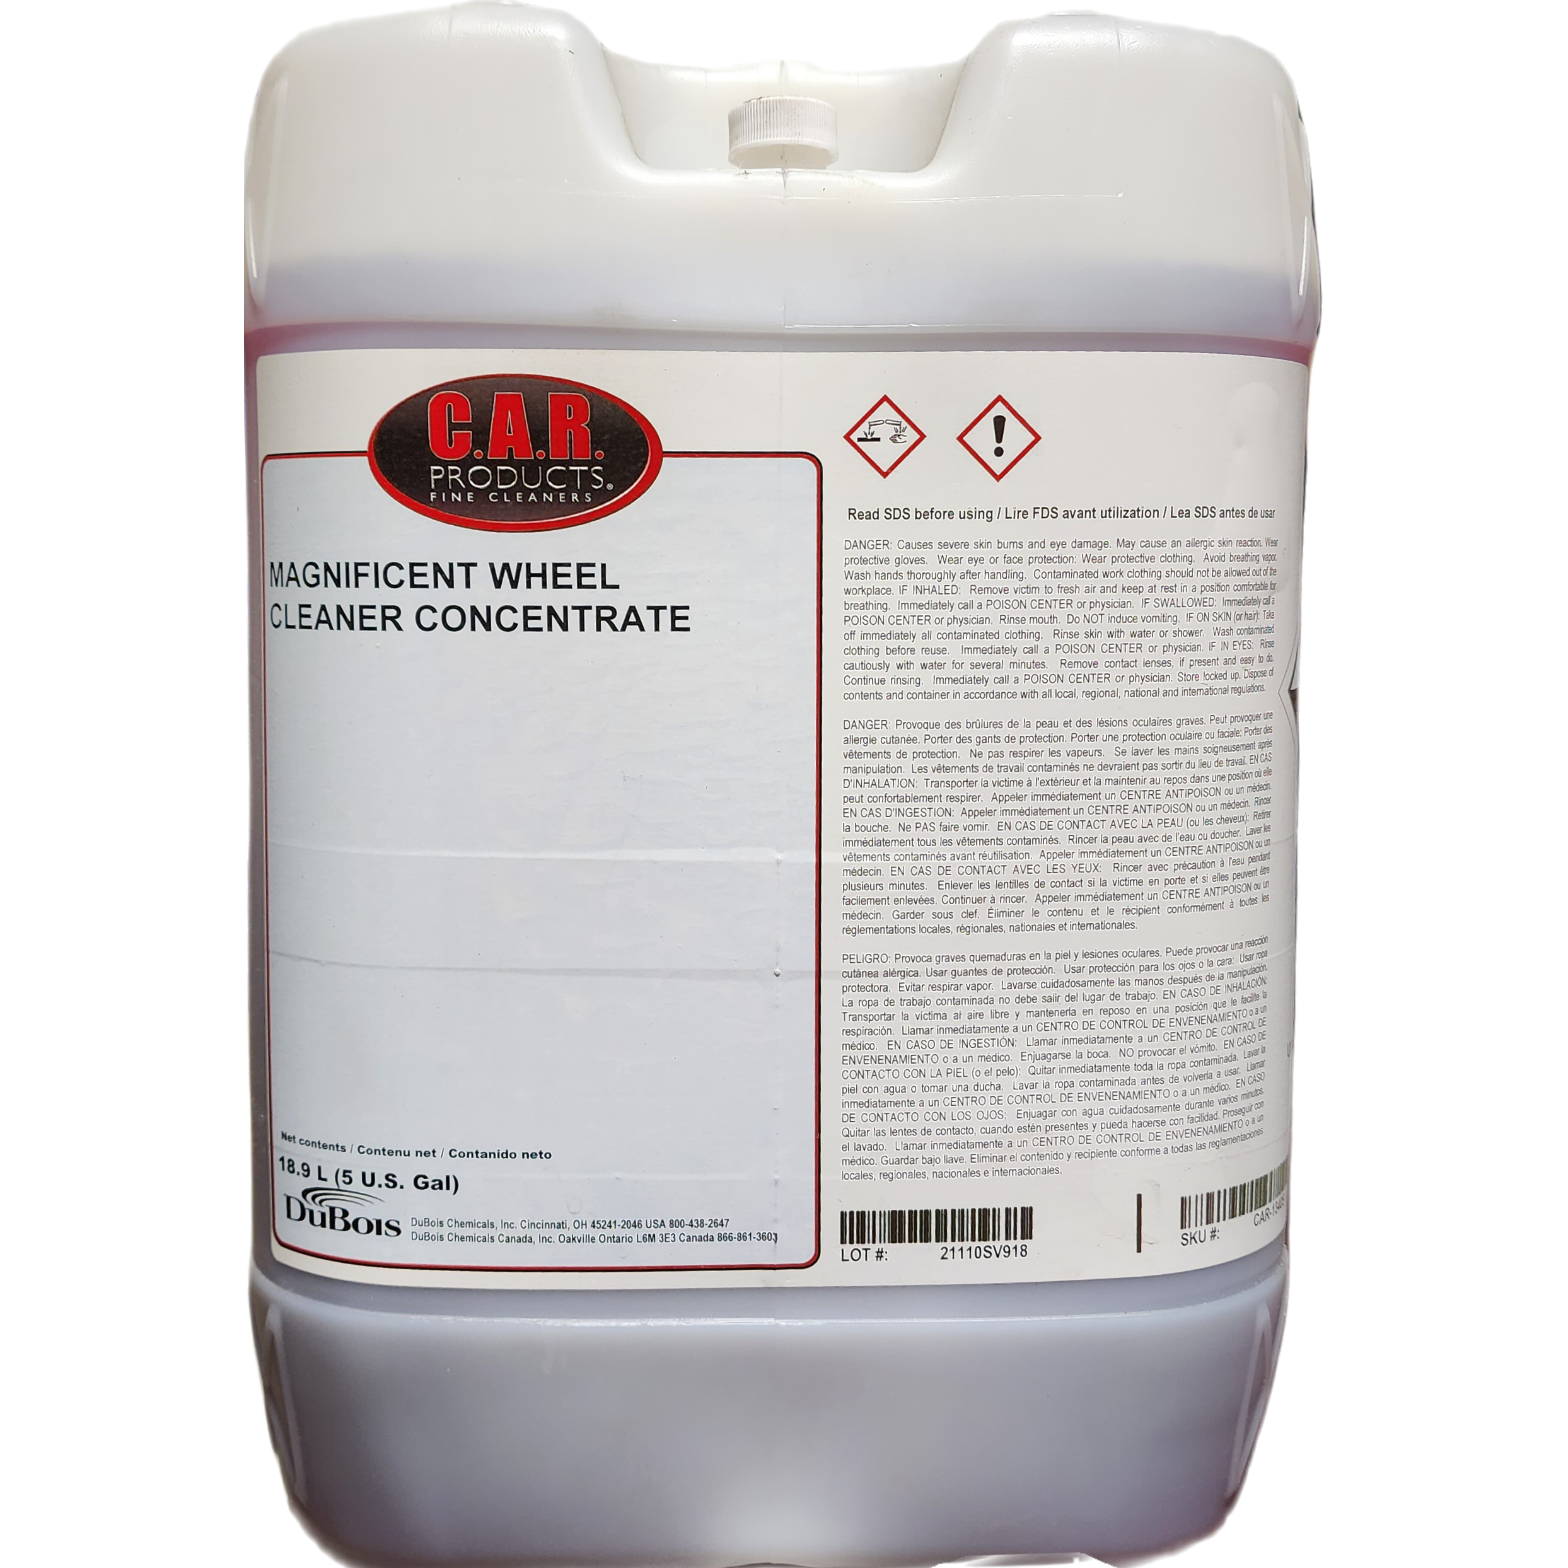 XCP ICS-41205 CAR Products Magnificent Wheel Cleaner Concentrate (5 gal)